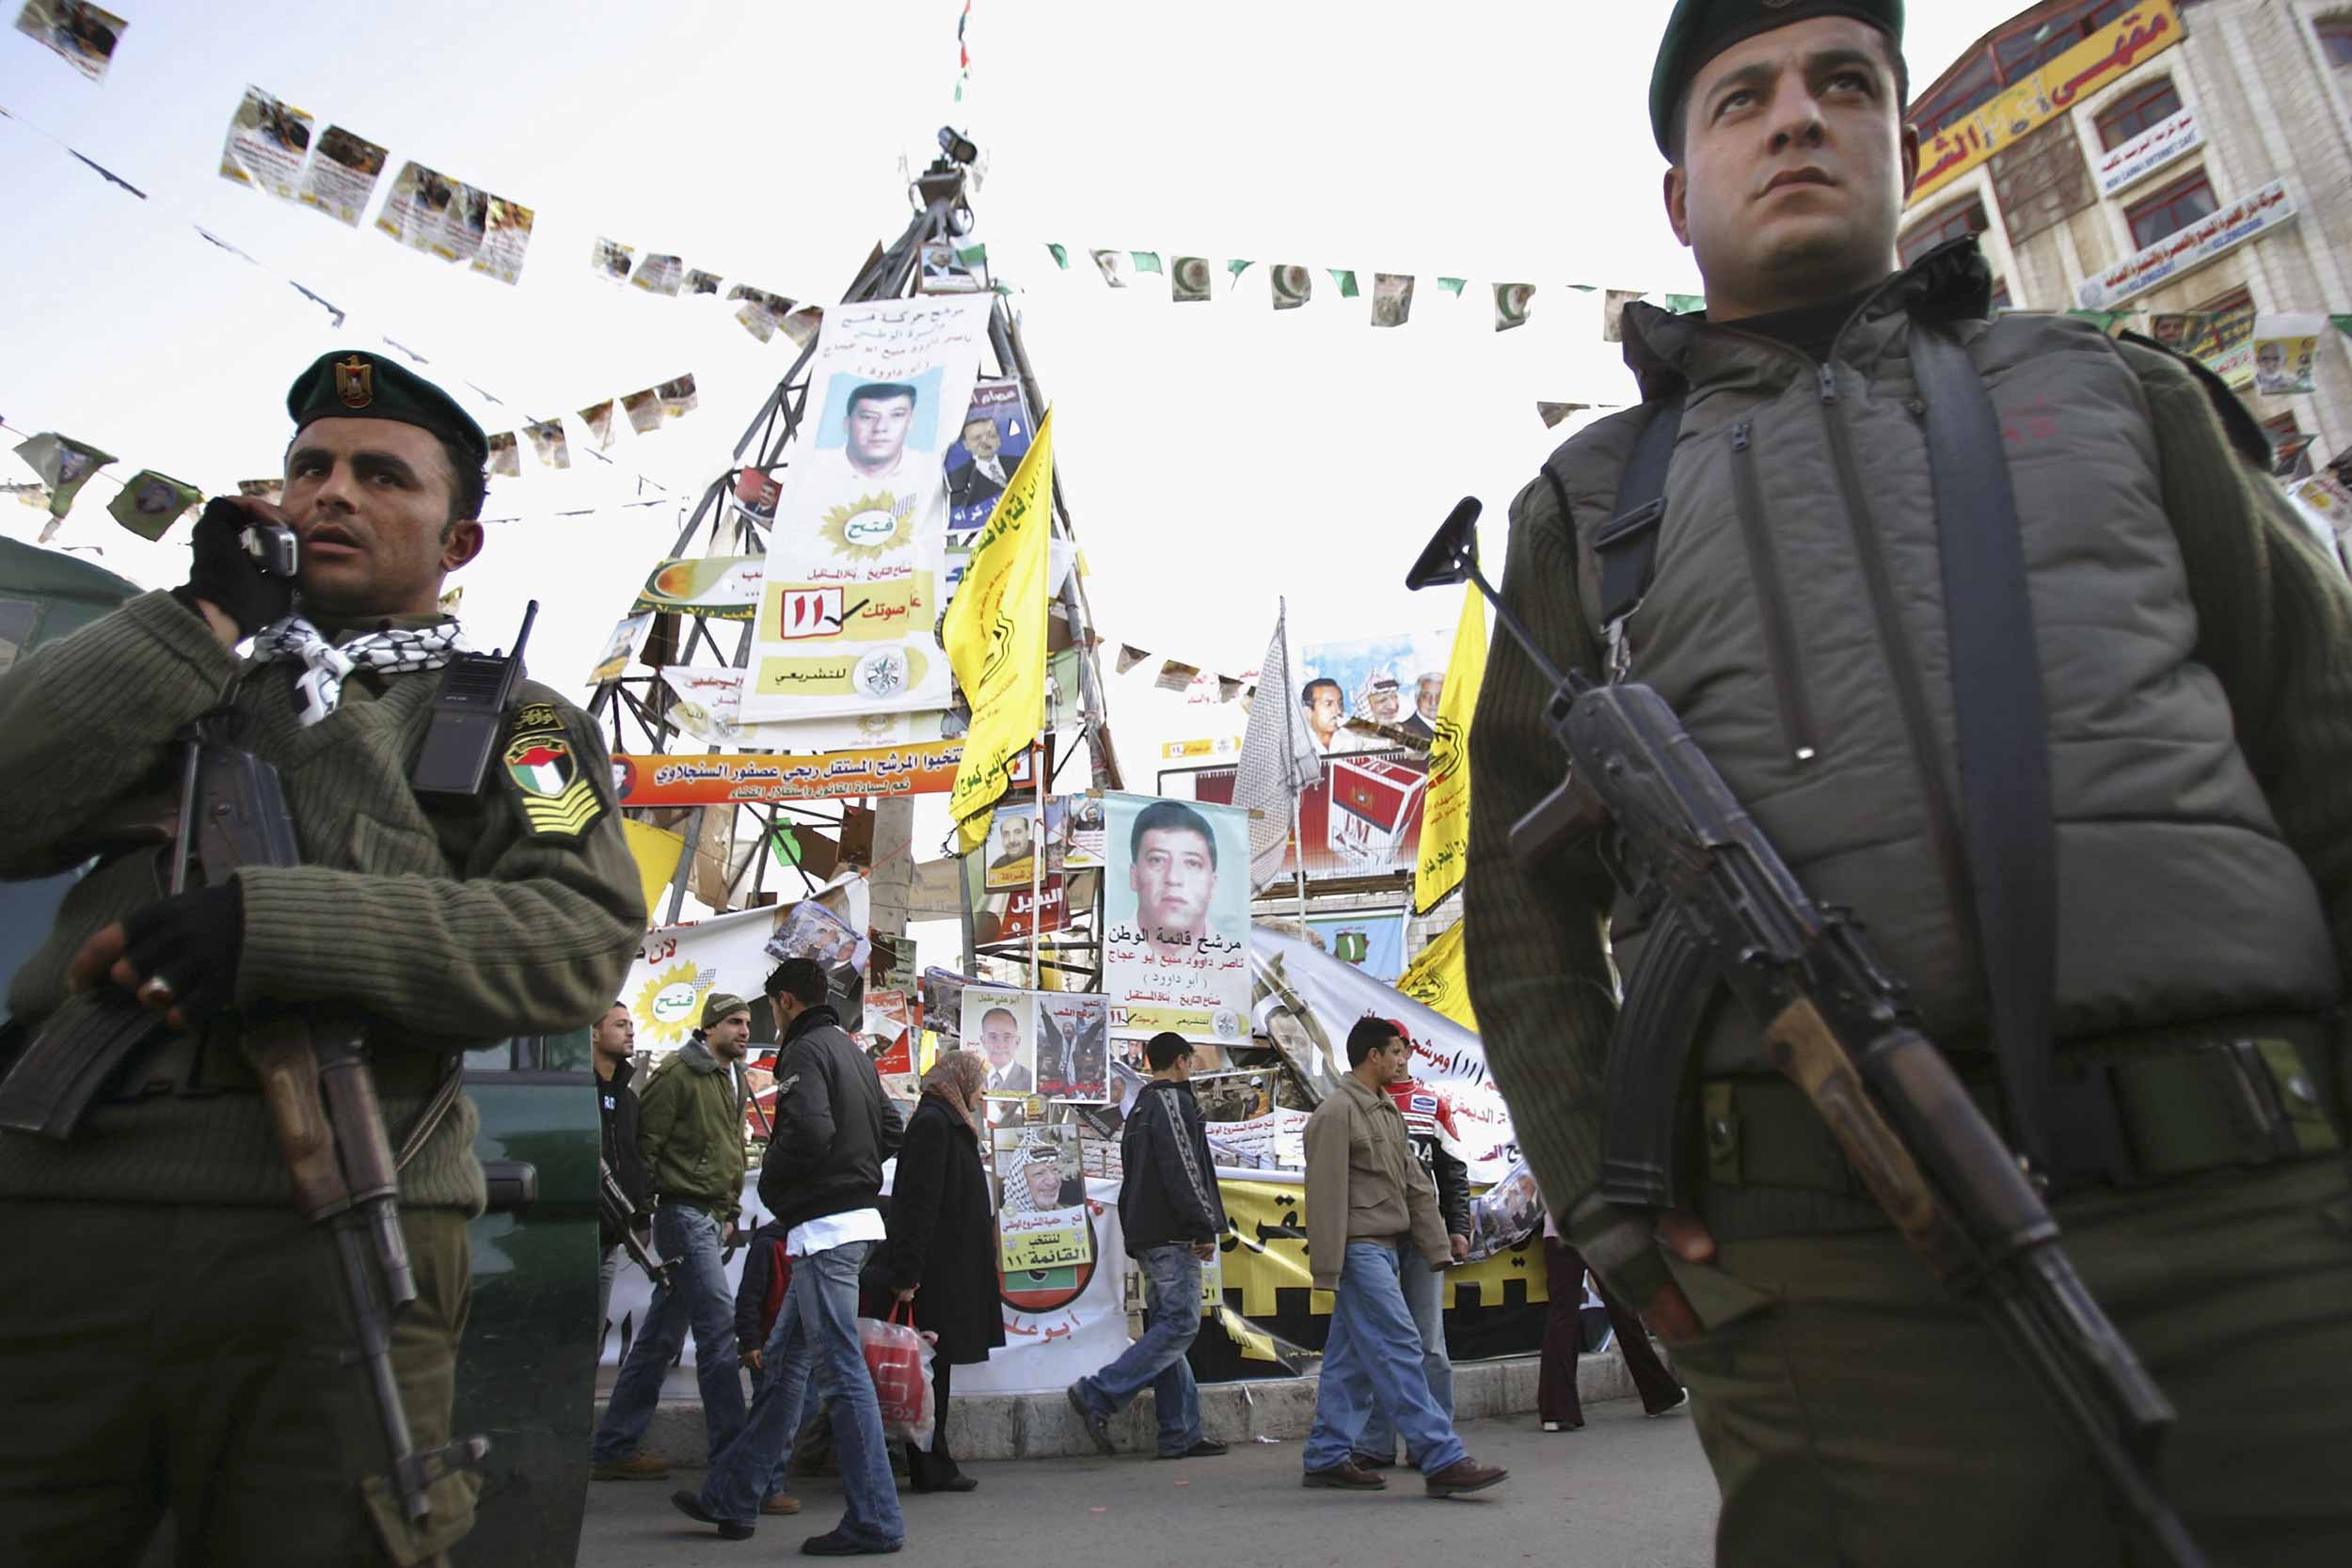 Palestinian policemen secure the Manara square, in the West Bank city of Ramallah, filed with flags and party electoral campaign posters on January 23, 2006 in a run up to the parliamentary elections. © Uriel Sinai/Getty Images